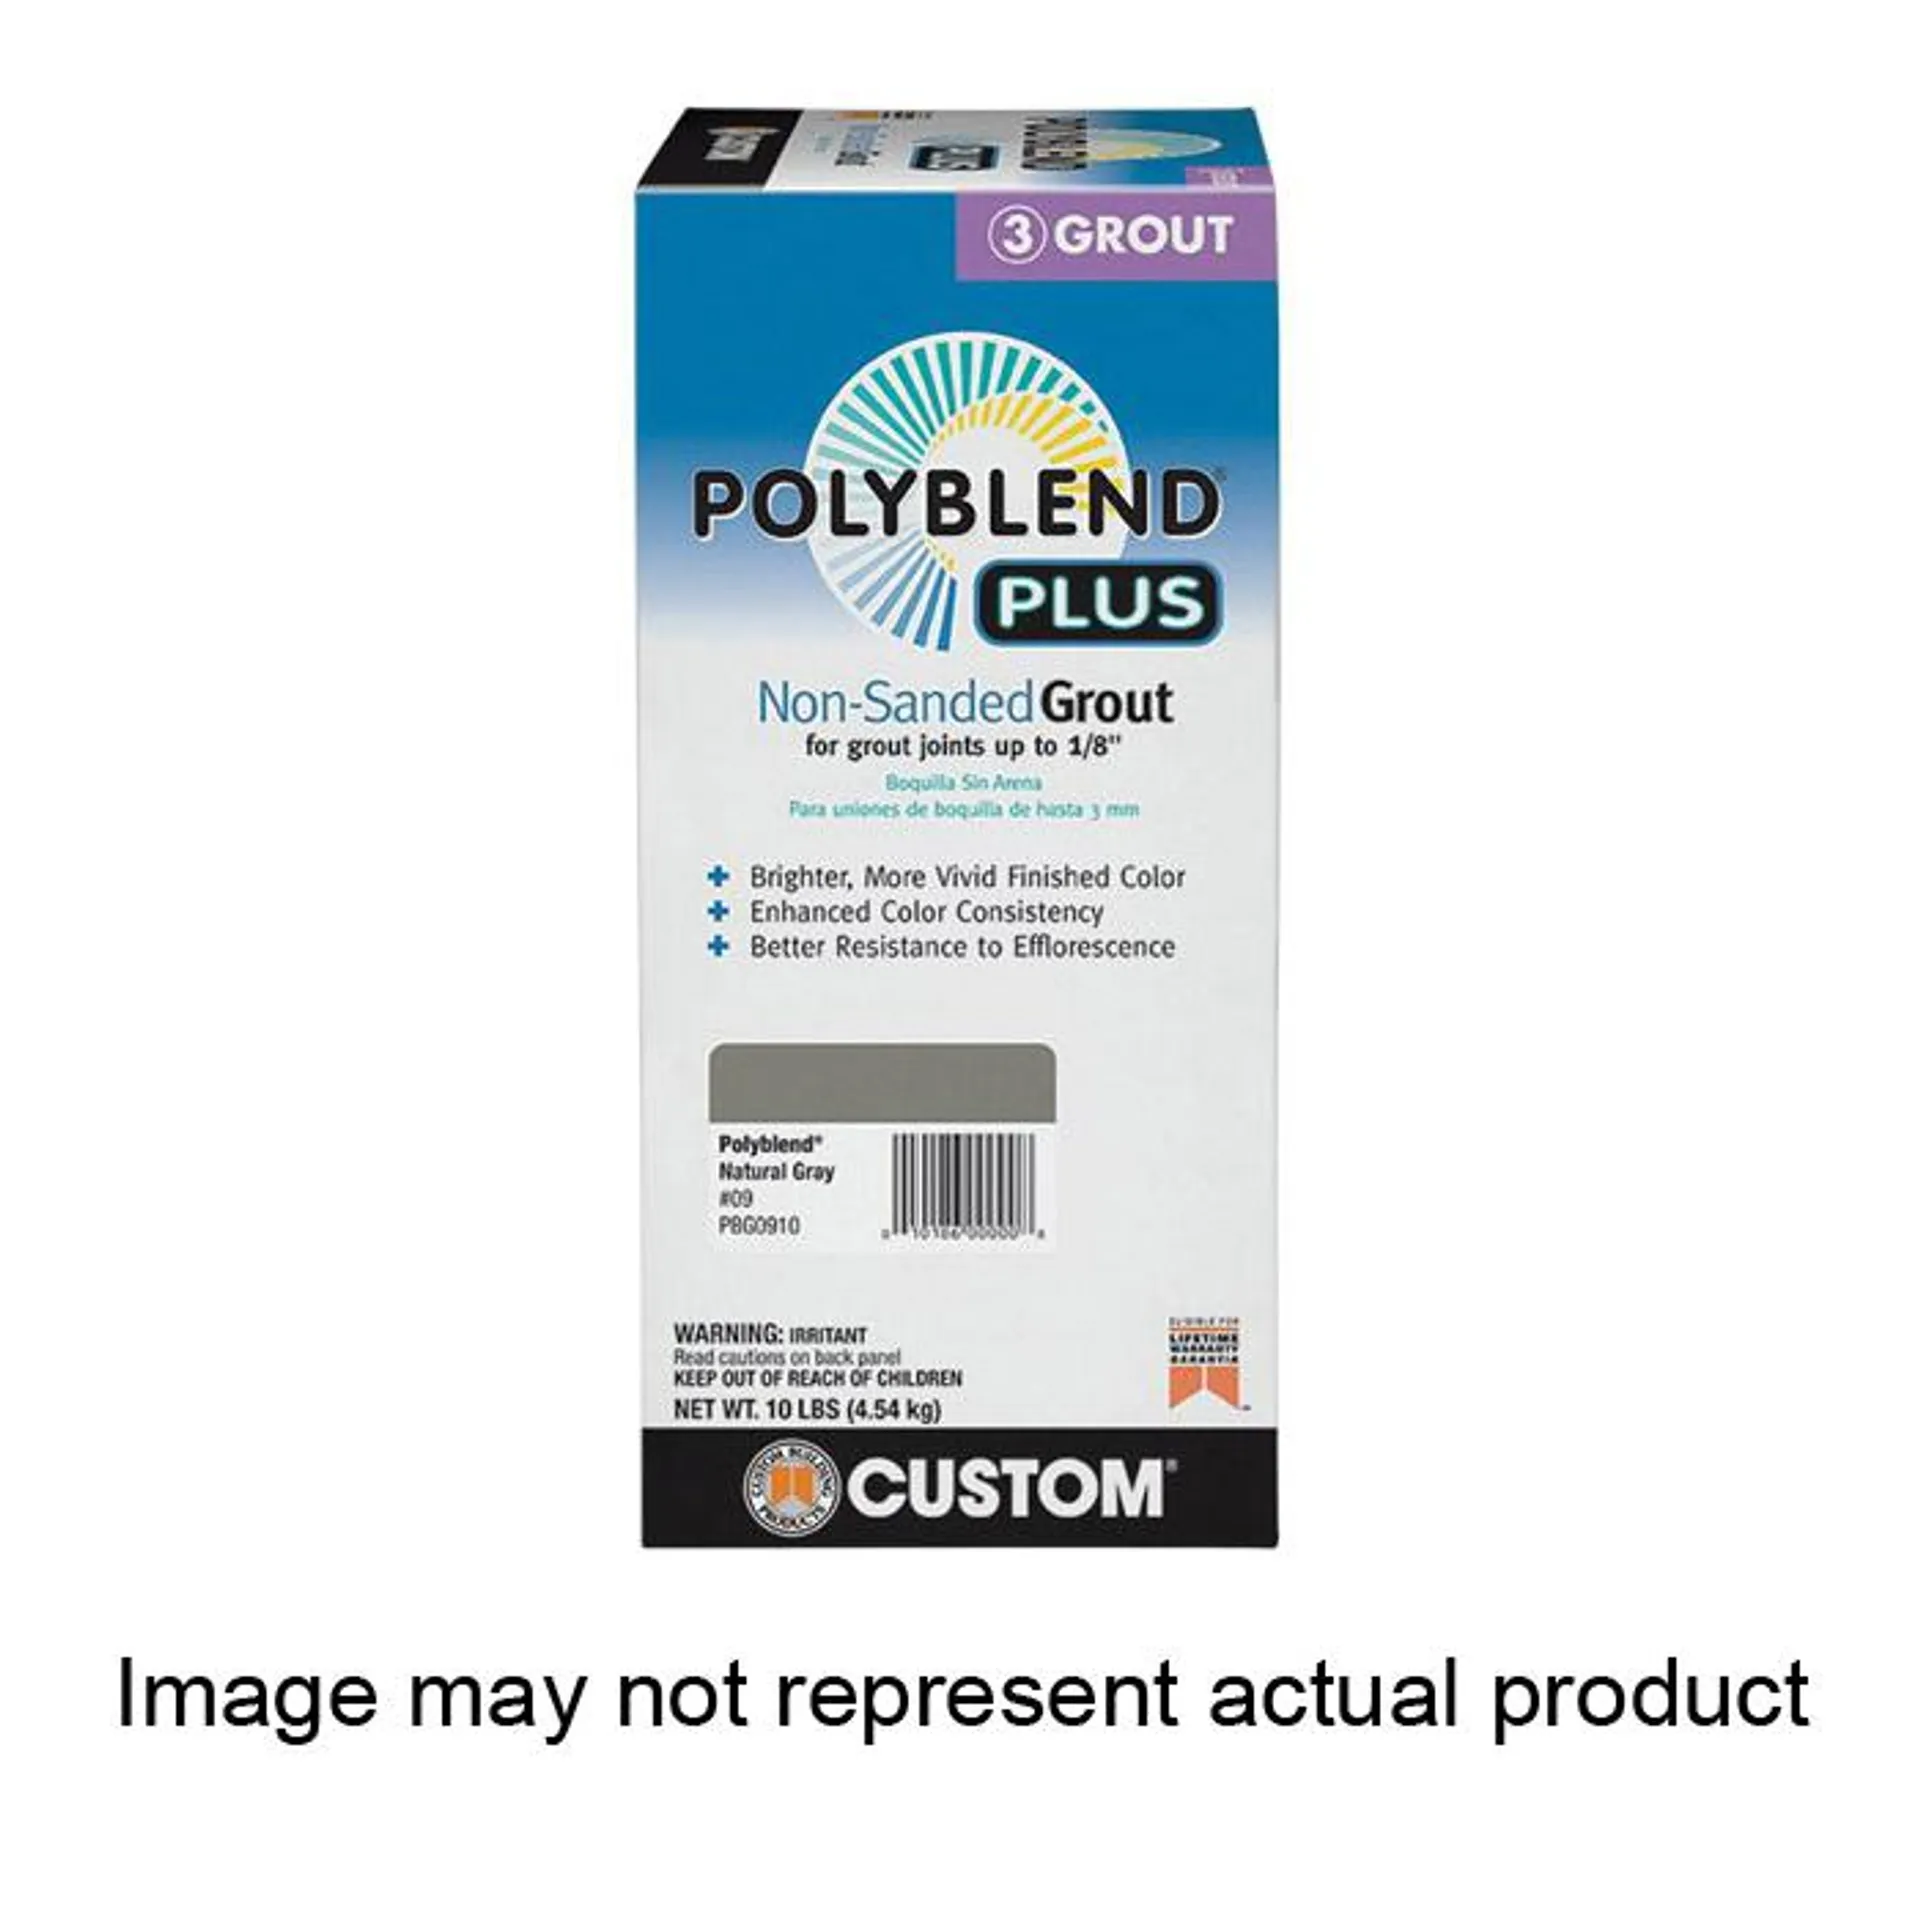 Polyblend PBPG64610 Non-Sanded Grout, Solid Powder, Characteristic, Coffee Bean, 10 lb Box